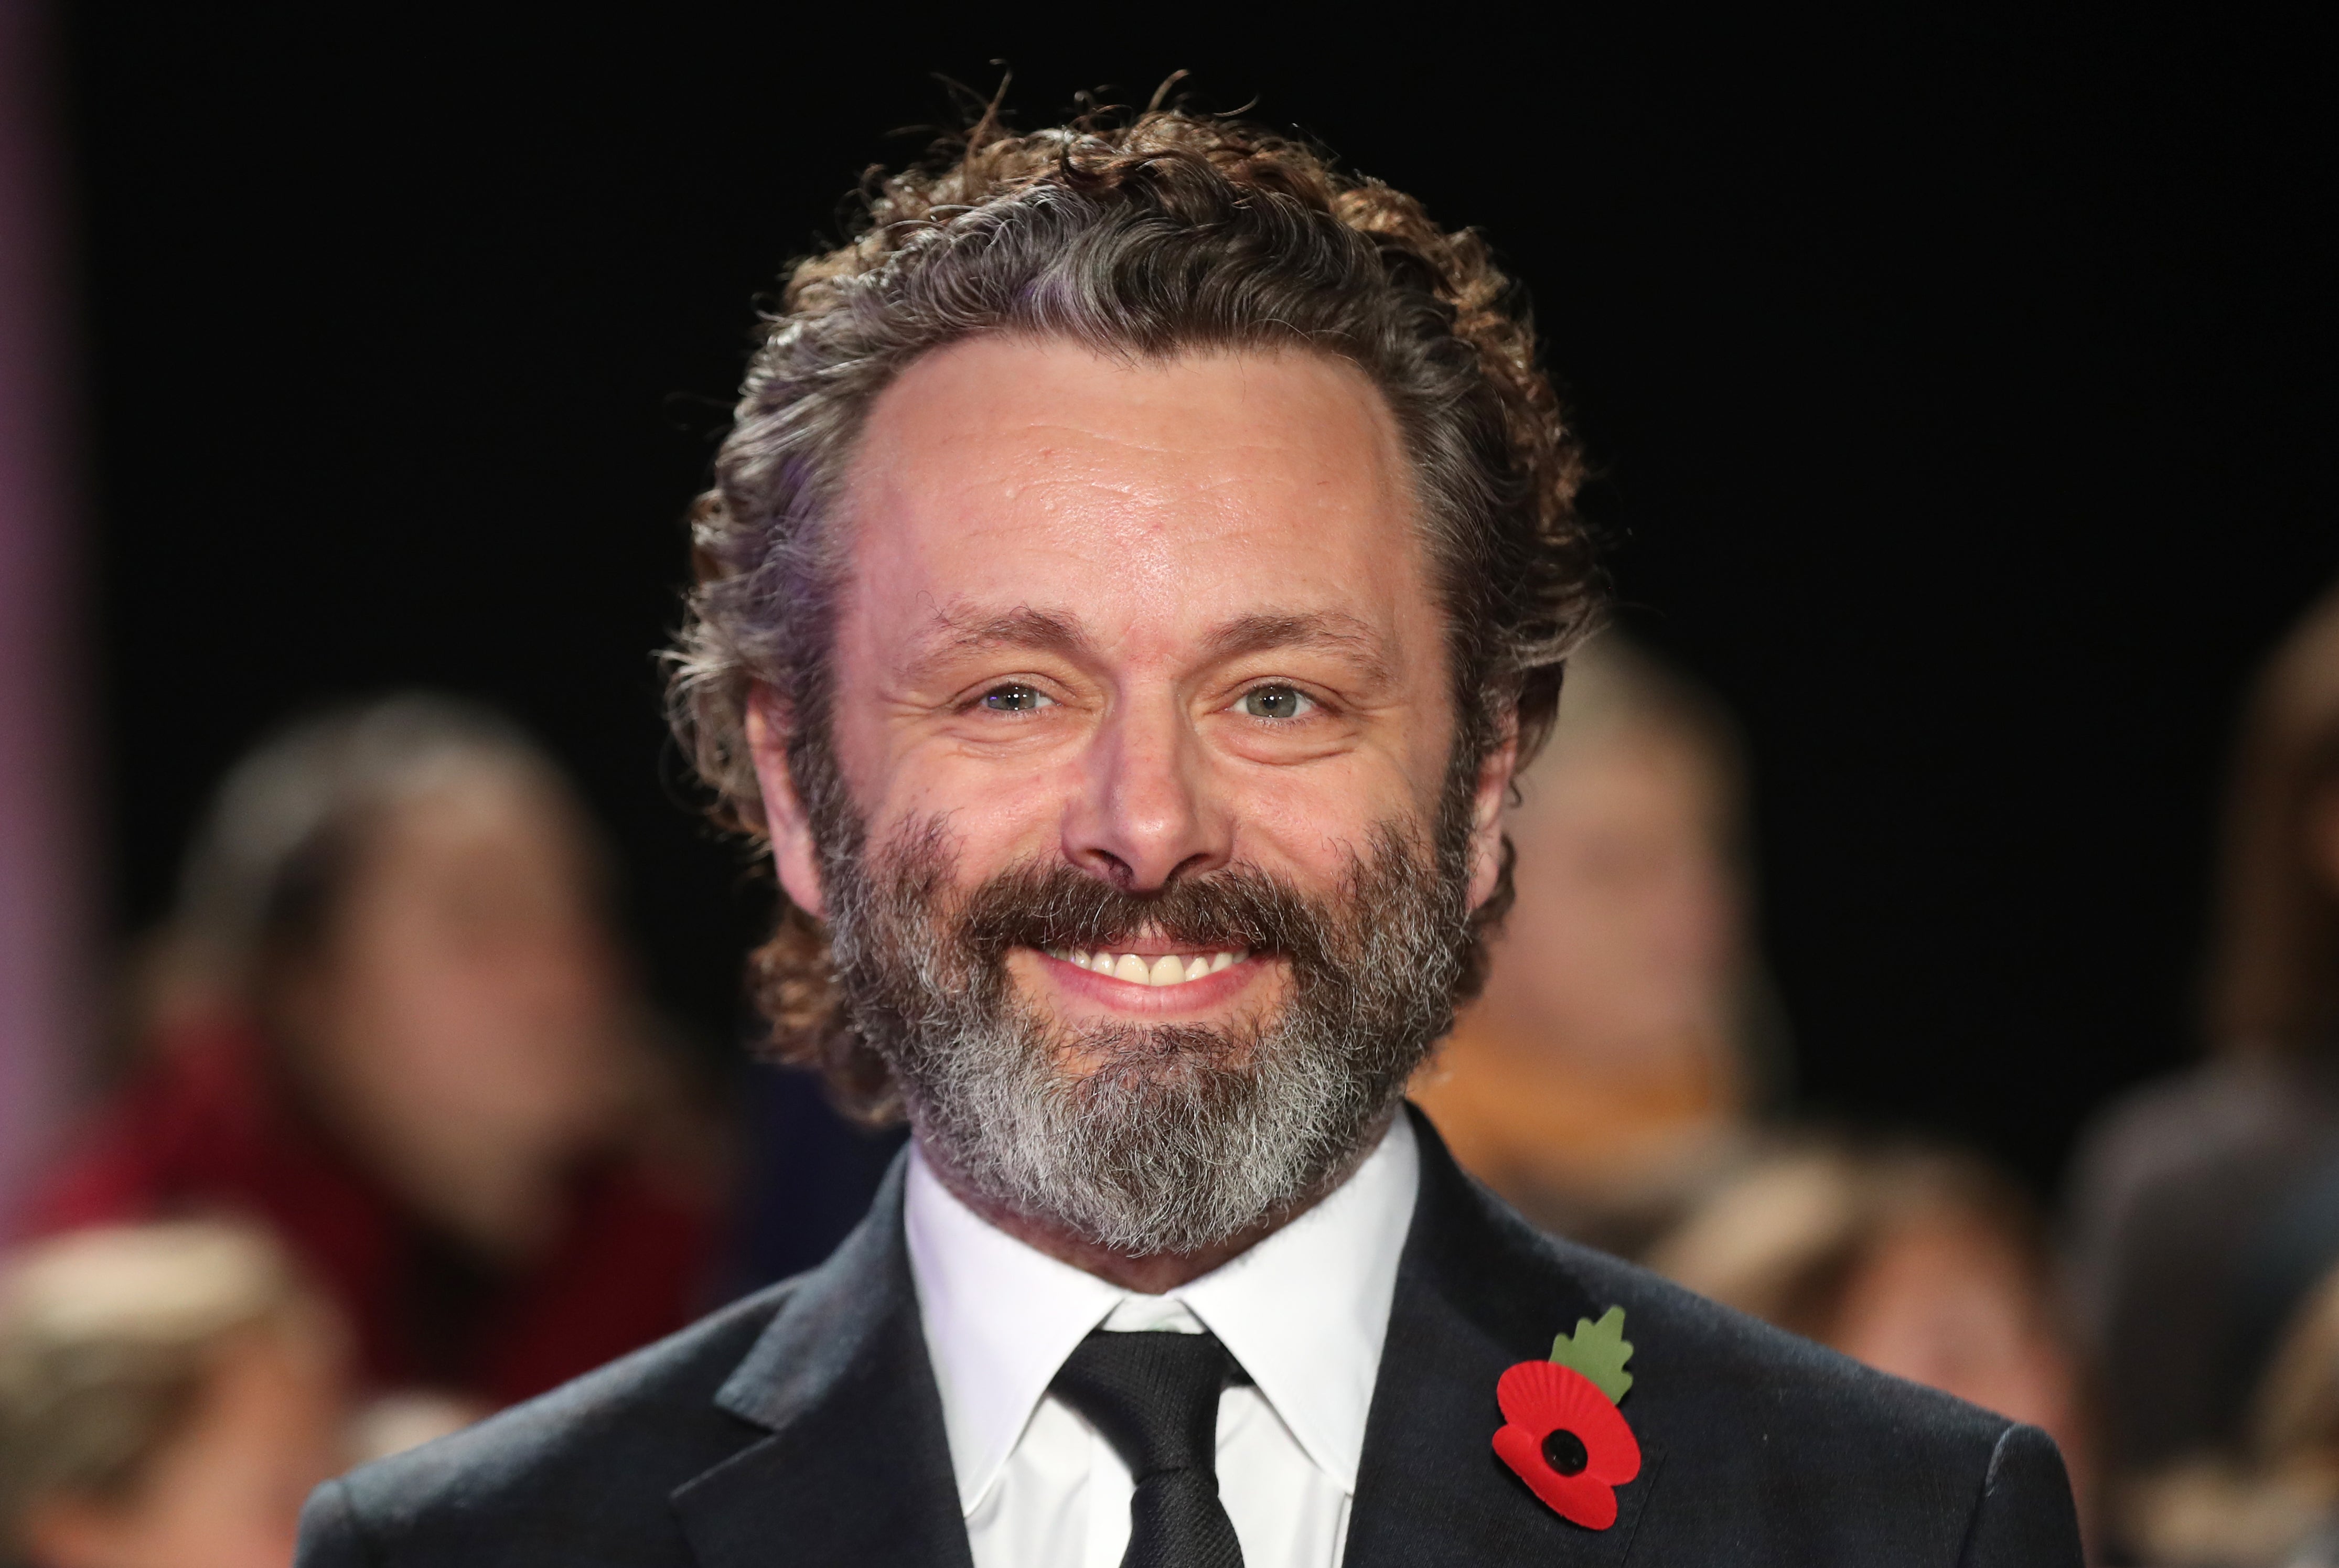 Hollywood actor Michael Sheen has visited the Wales squad after his impassioned speech on television (Steve Parsons/PA)